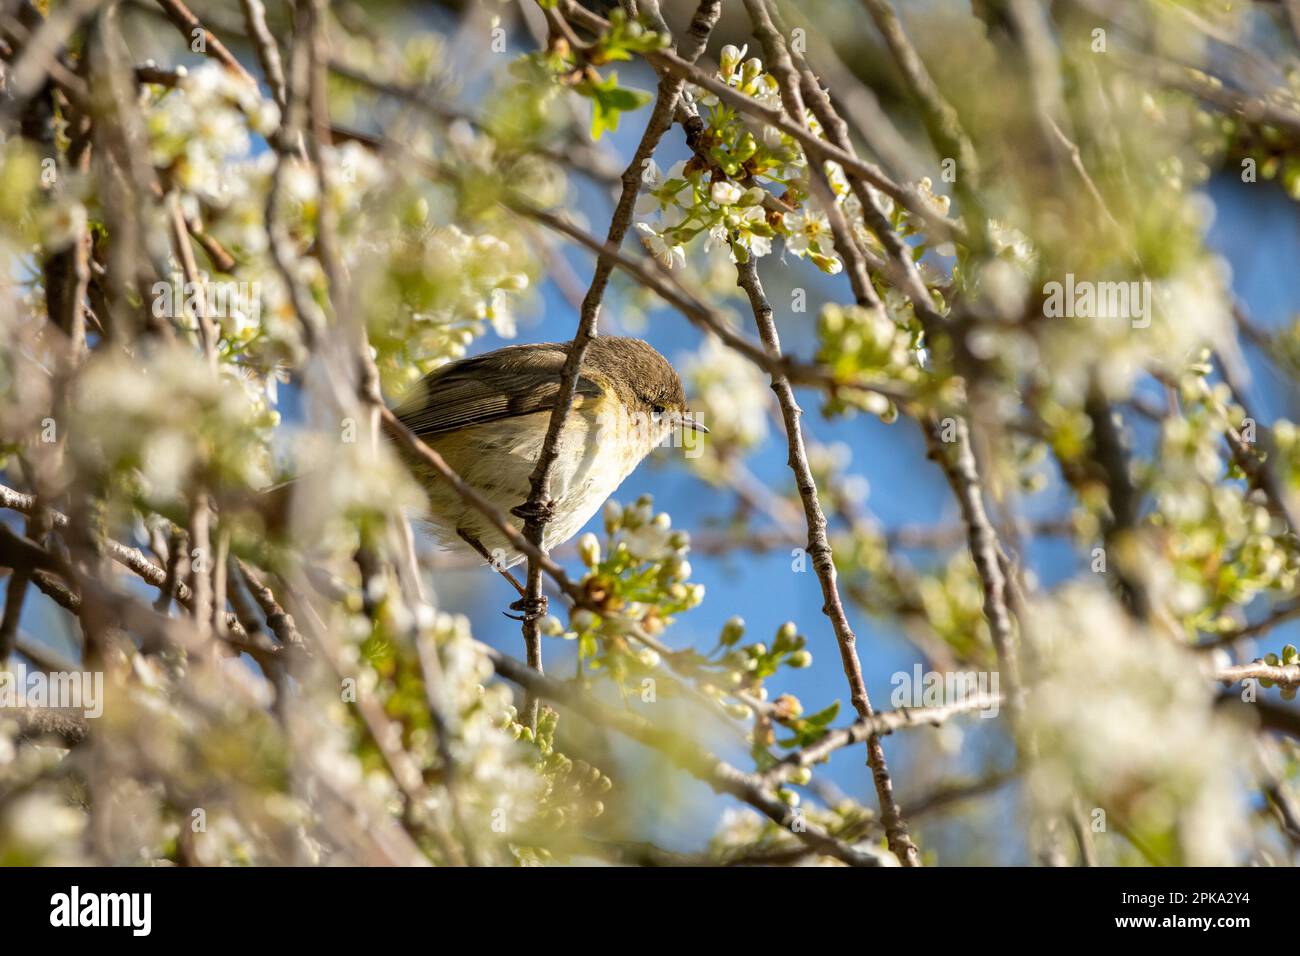 Chiffchaff or Willow Warbler (Phylloscopus collybita) on a flowering tree. Stock Photo